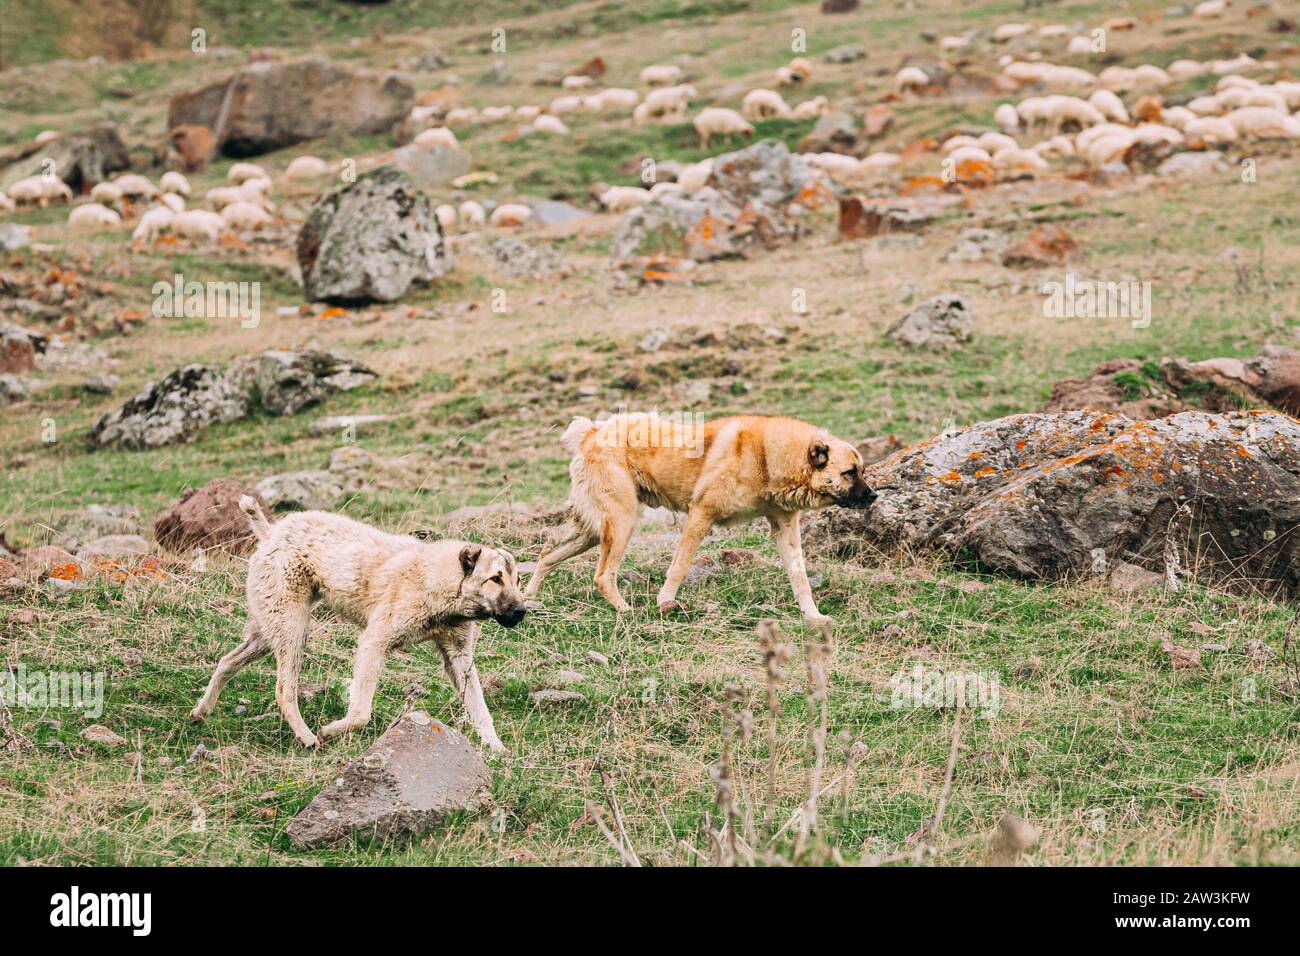 Two Central Asian Shepherd Dogs Herding Sheep In Mountains Of Georgia. Alabai - An Ancient Breed From The Regions Of Central Asia. Used As Shepherds, Stock Photo